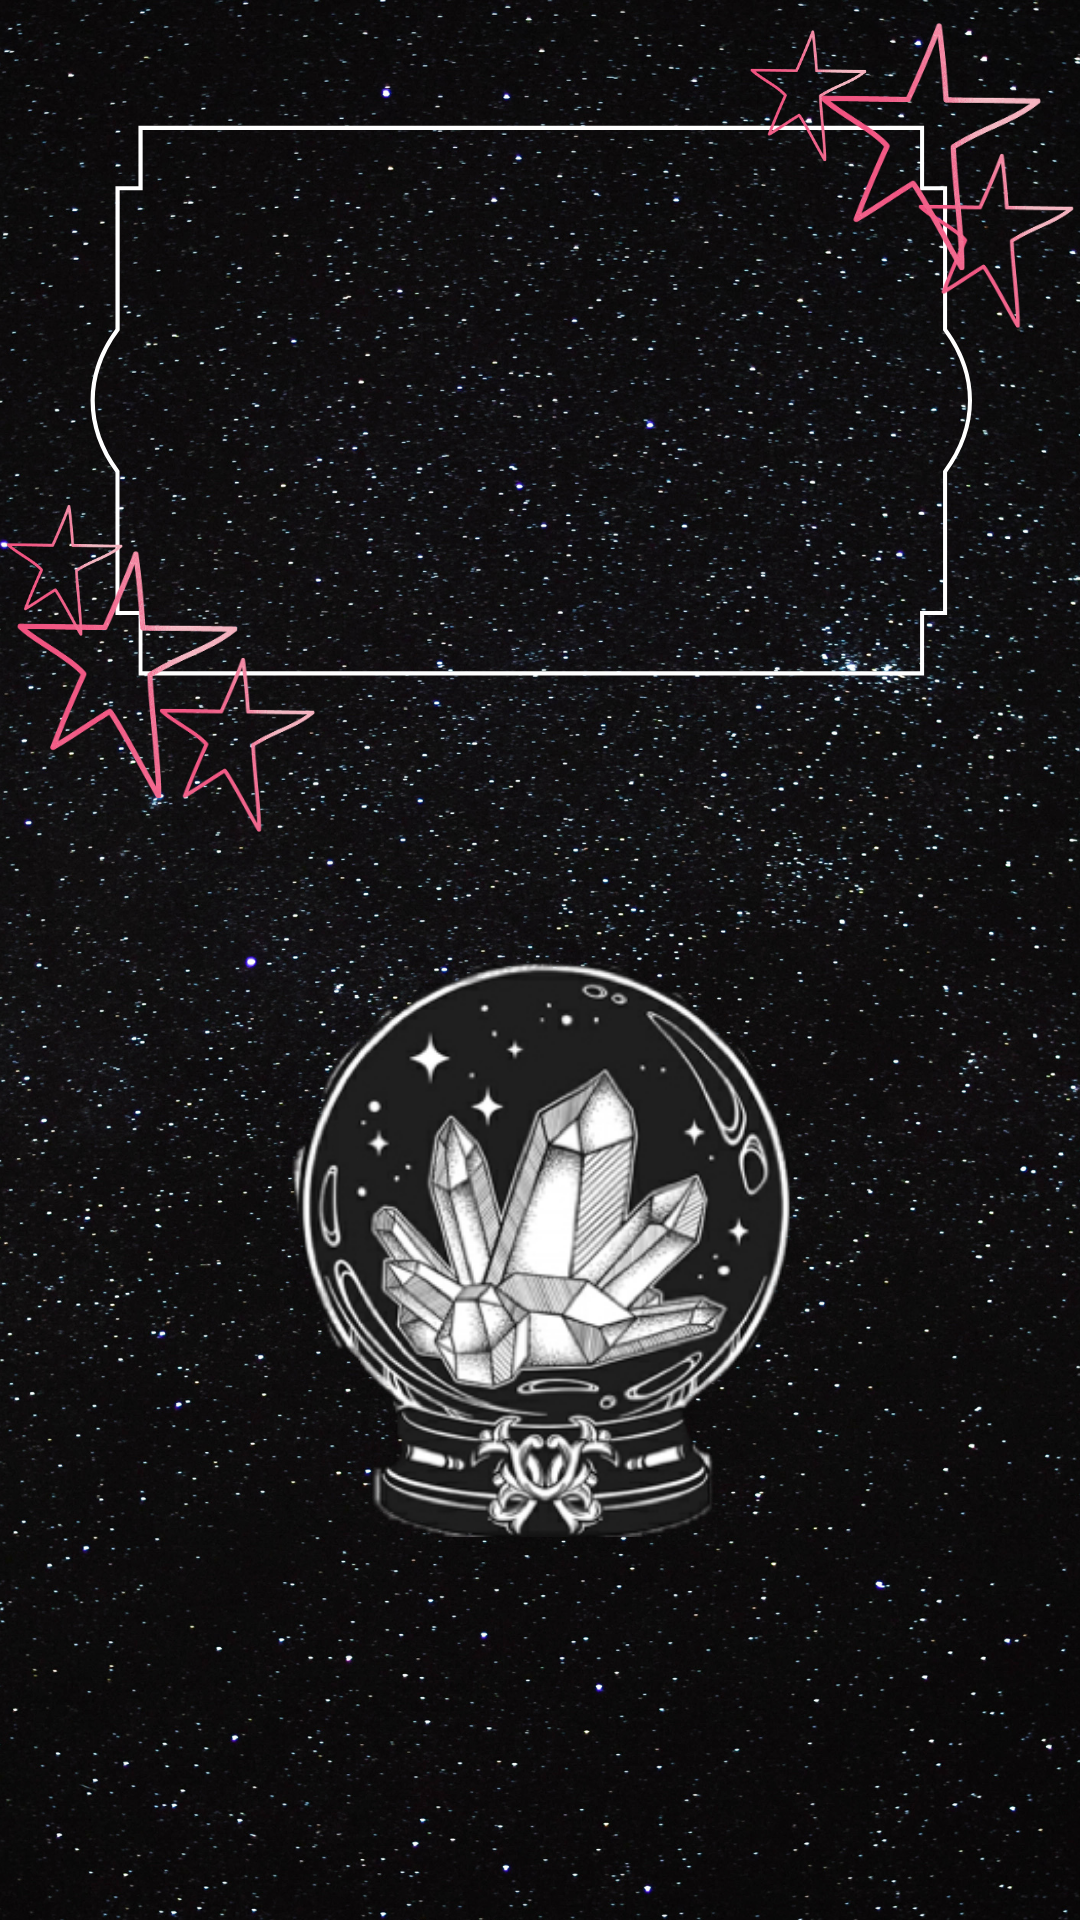 Crystal Ball IPhone wallpaper. Witch wallpaper, Witchy wallpaper, iPhone background wallpaper